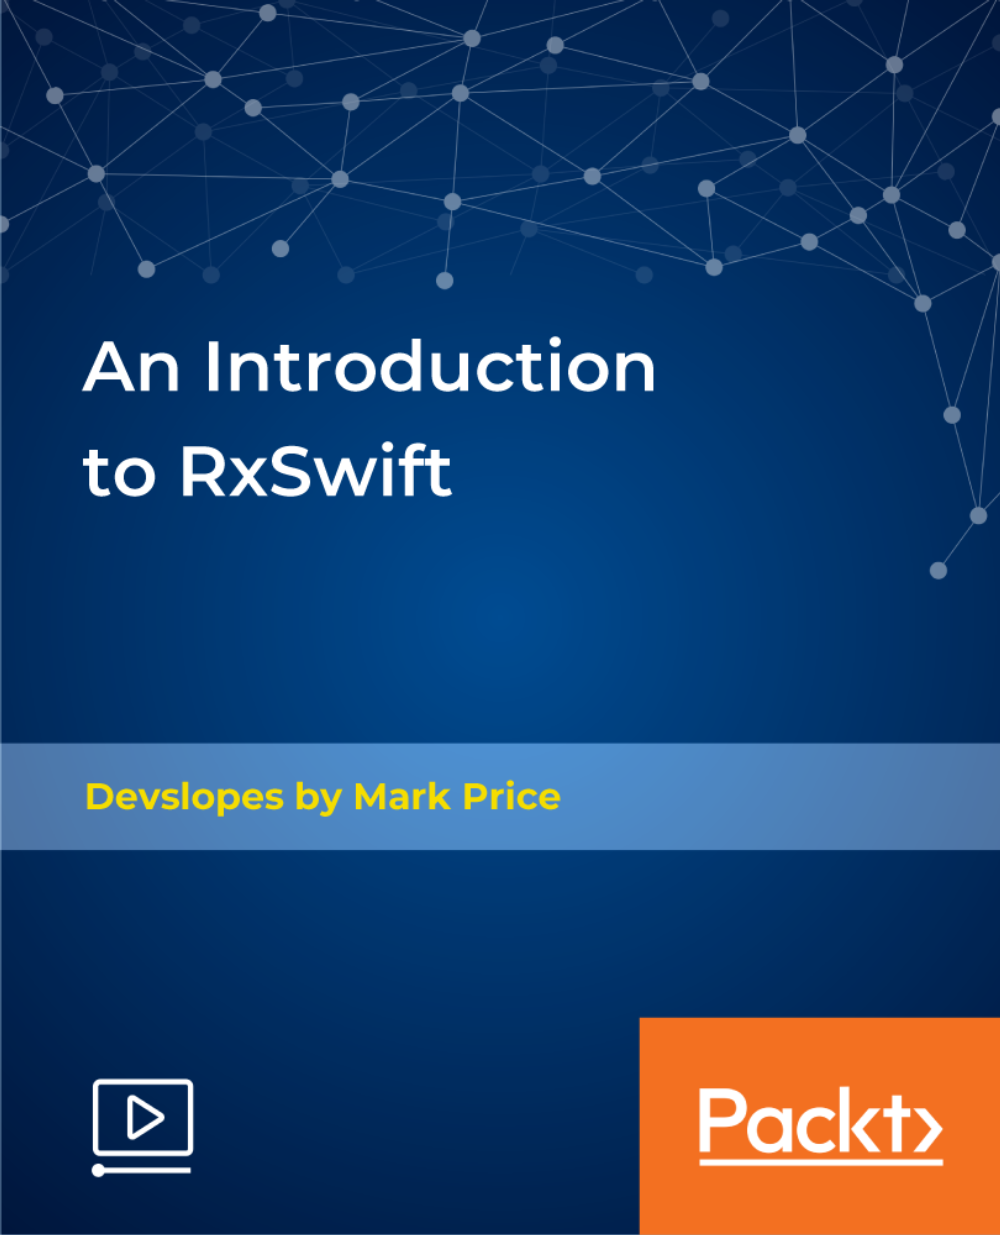 An Introduction to RxSwift